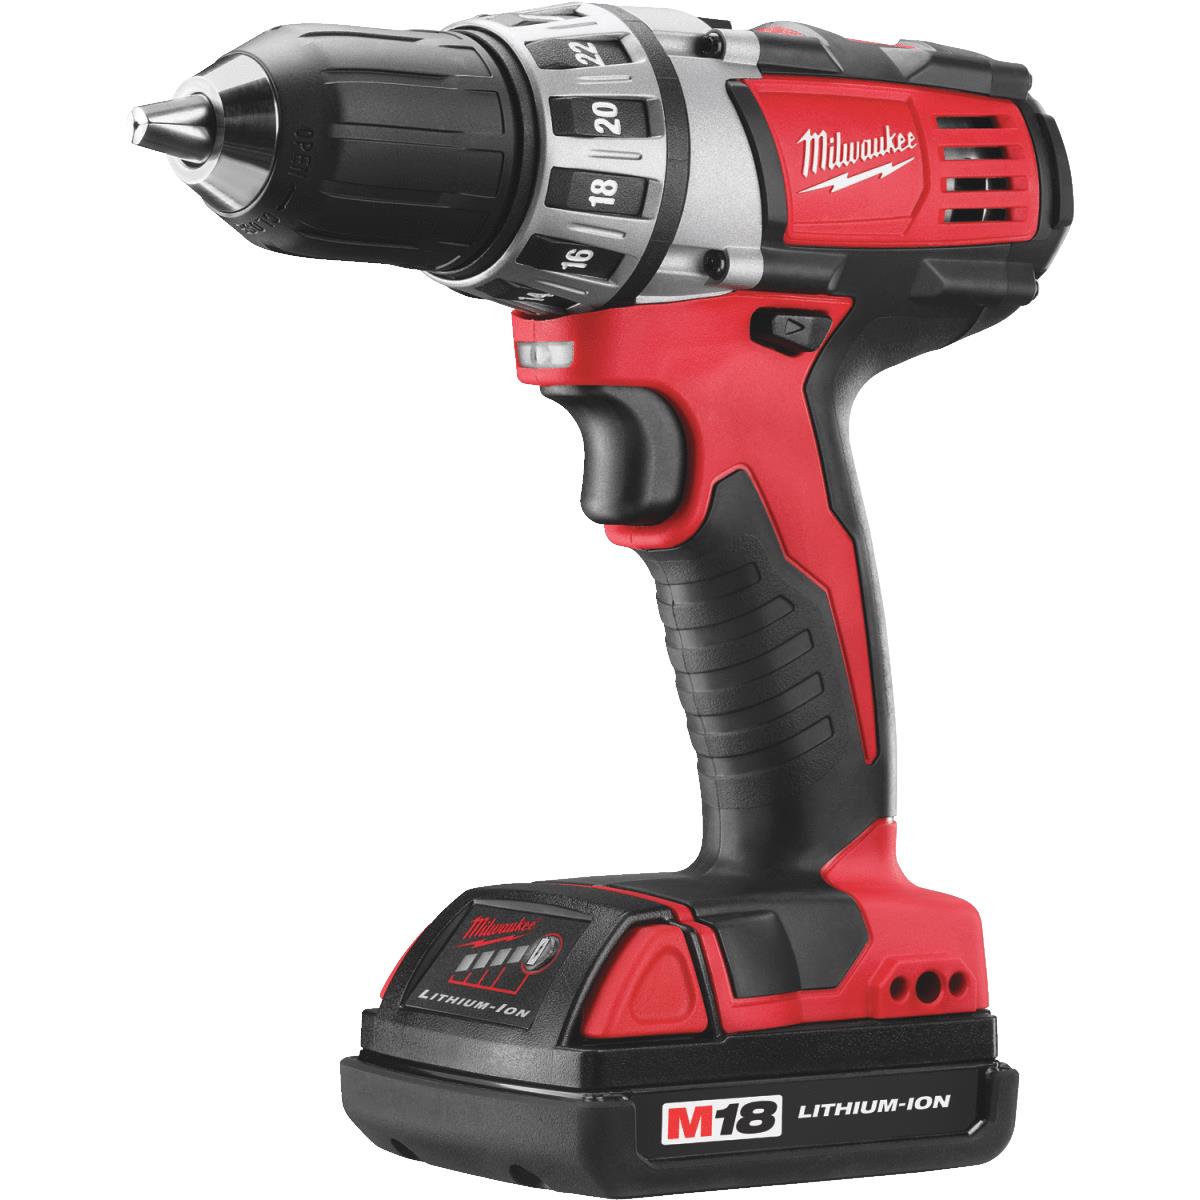 Milwaukee 2606-22CT 18V Lithium-Ion 1/2 inch Cordless Drill Driver Kit 